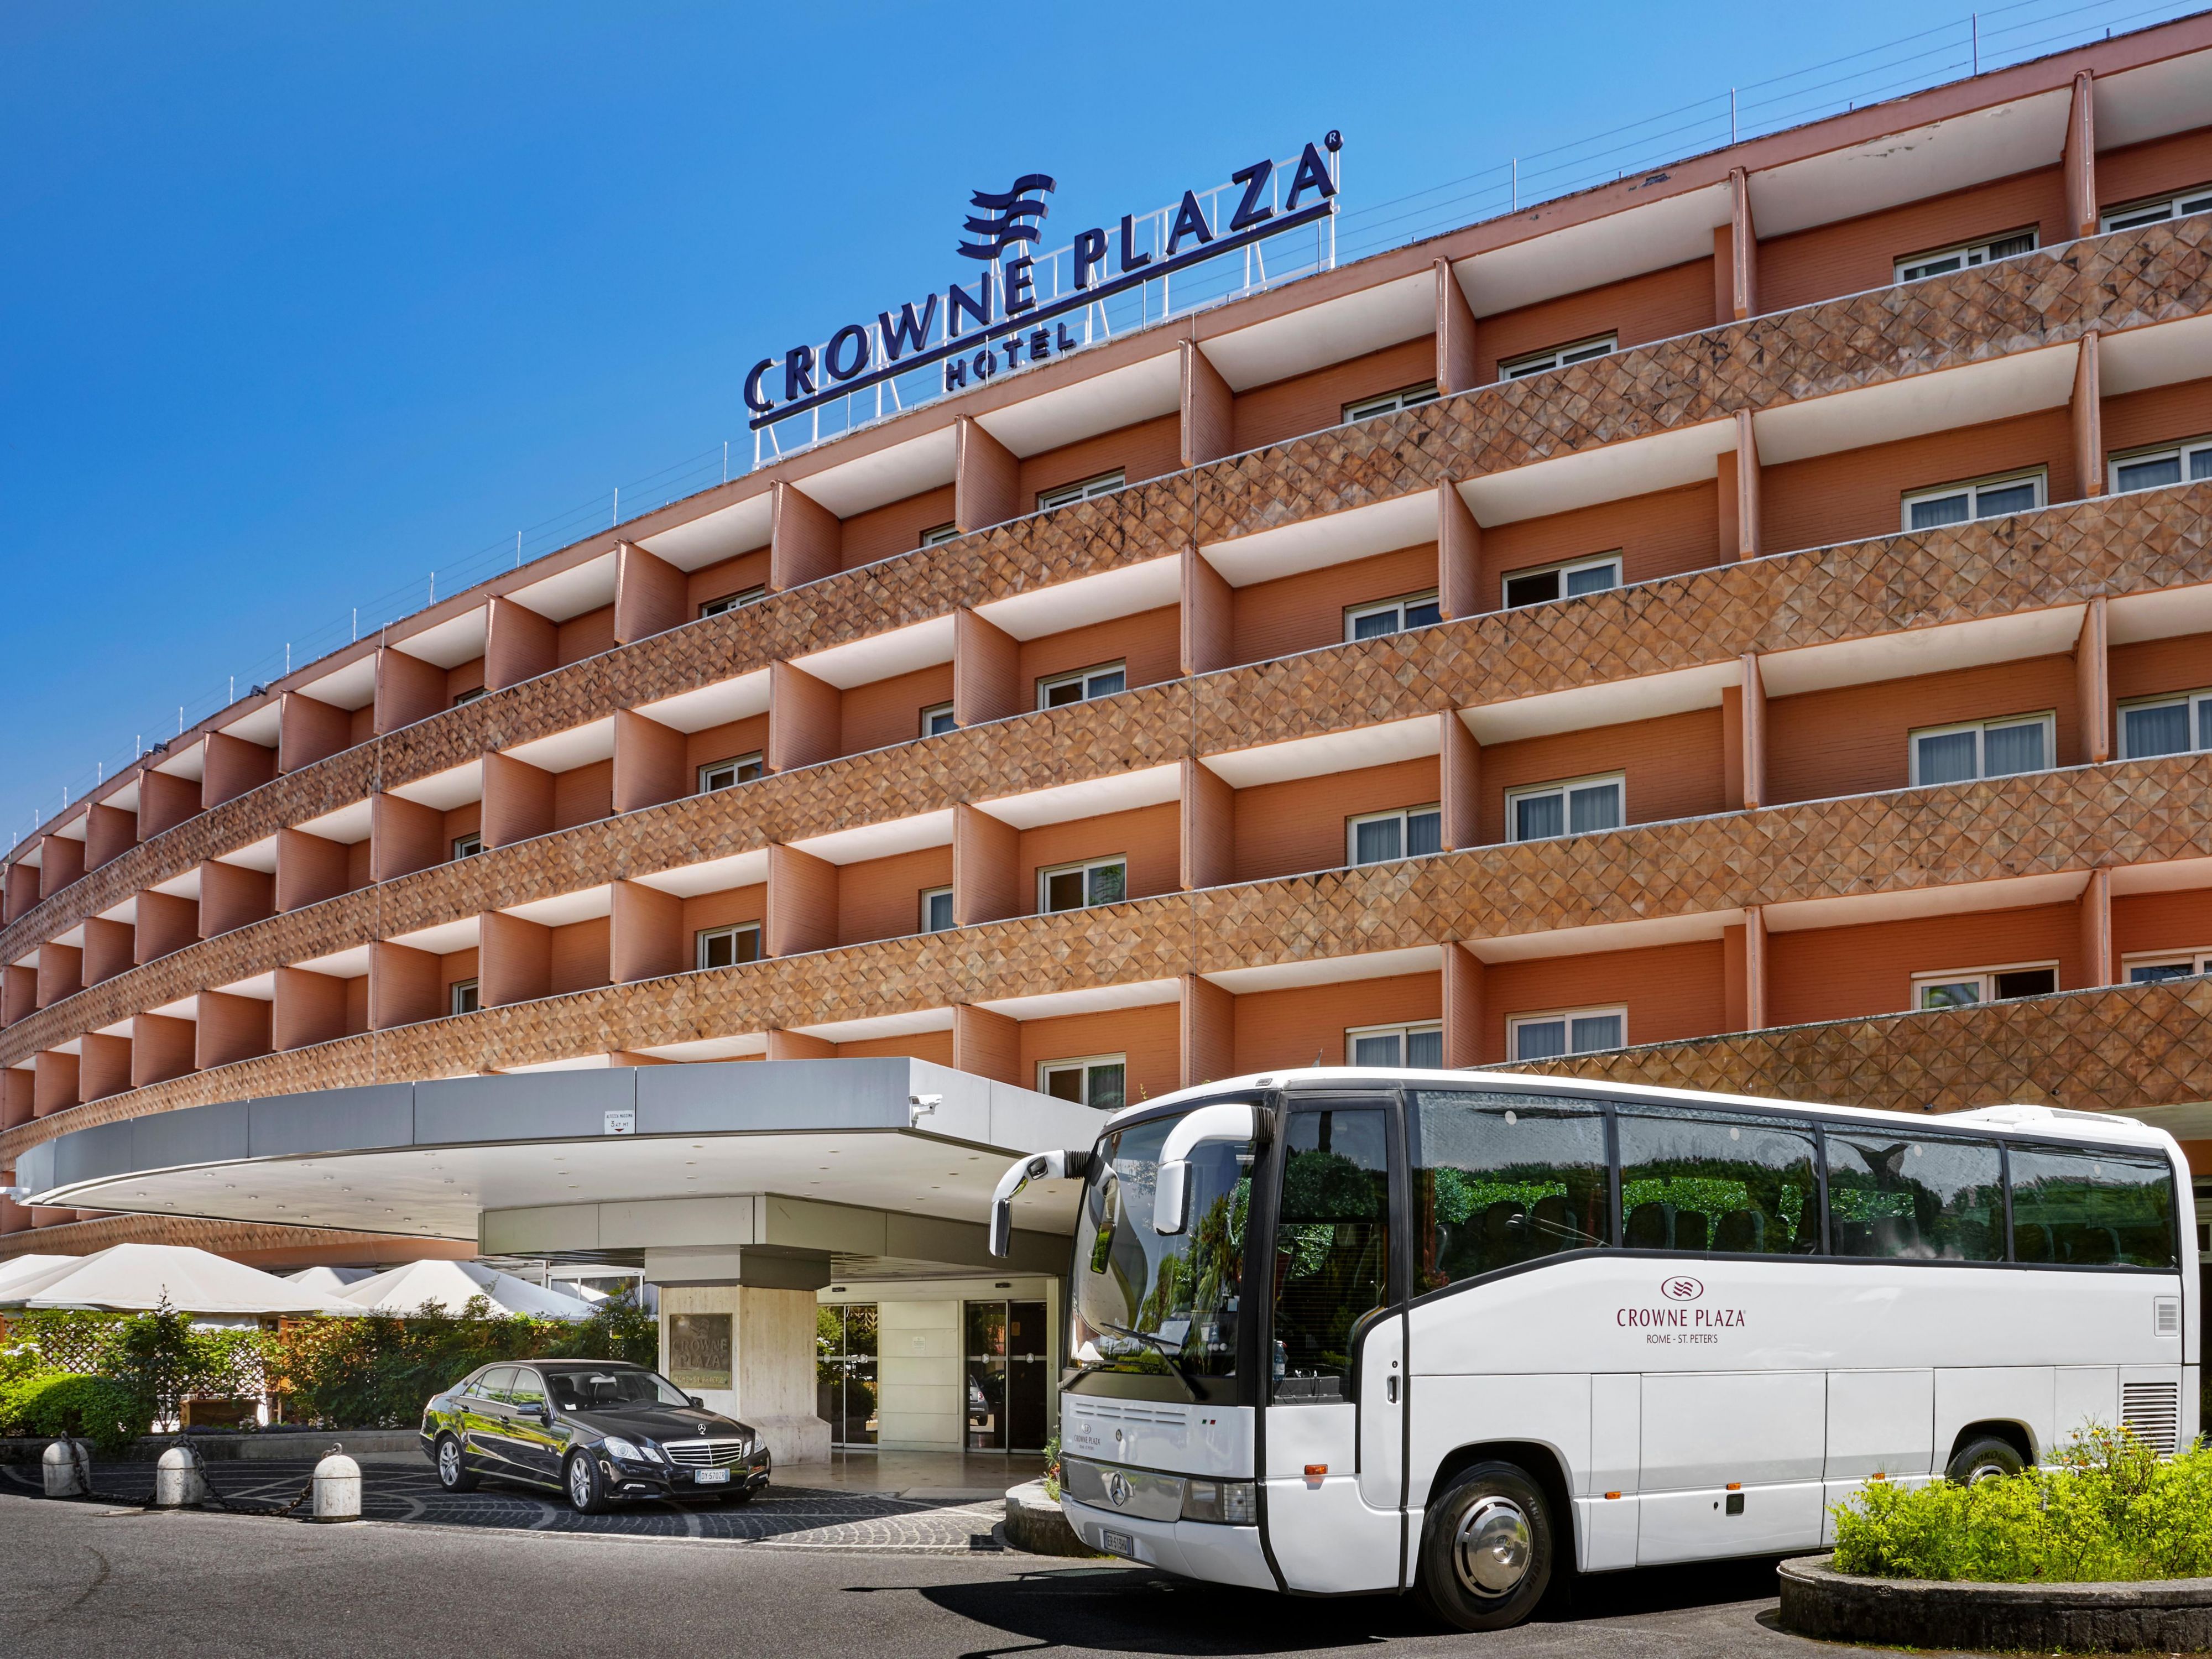 It is possible to book the shuttles to / from Fiumicino Airport via whatsapp on + 39 3899692215 or via email bus.plaza415@gmail.com 
Price 1-2 pax Euro 40 one way; 3-4 pax Euro 50 one way.